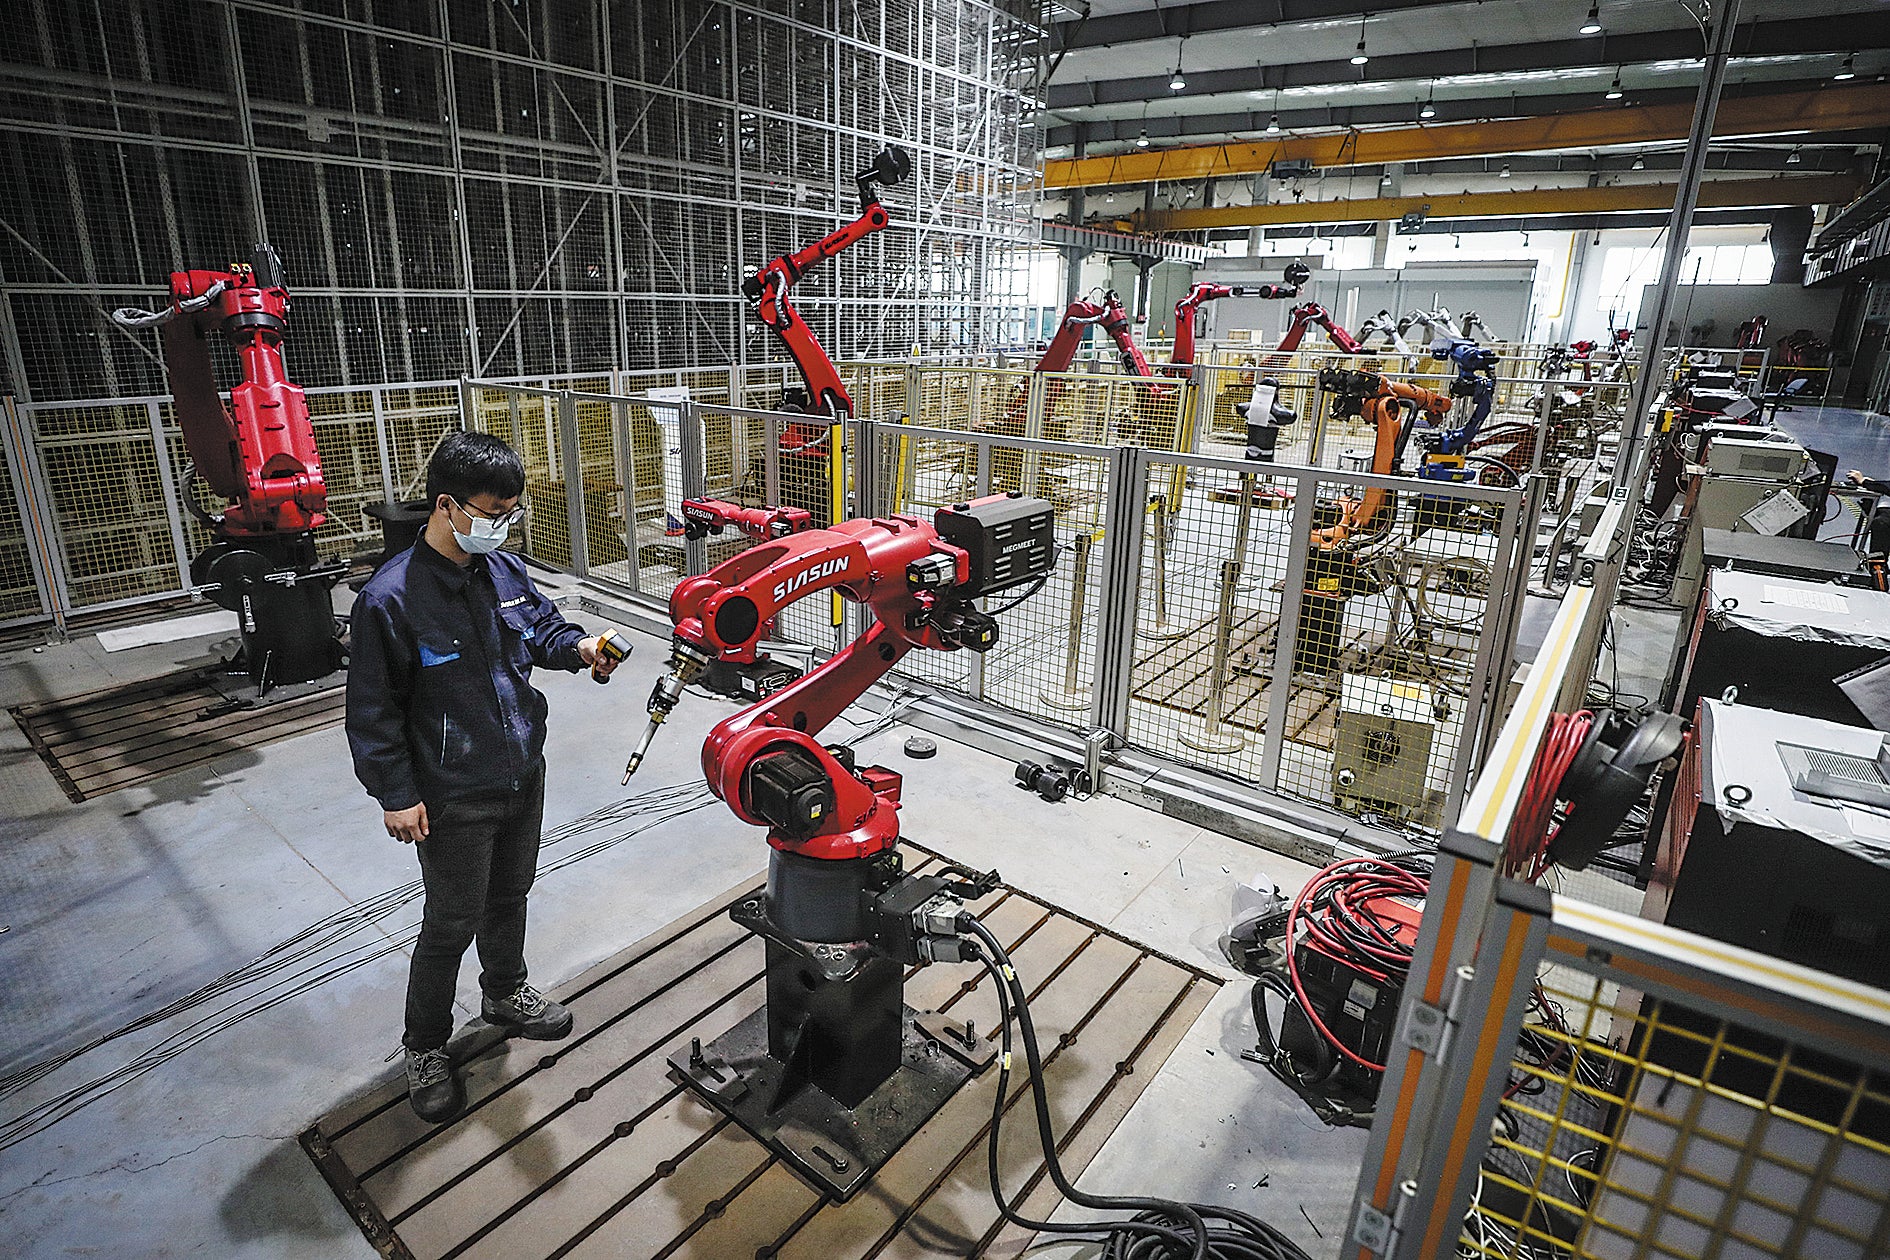 A Siasun technician inspects robots at a workshop in Shenyang, Liaoning province, in April 2022